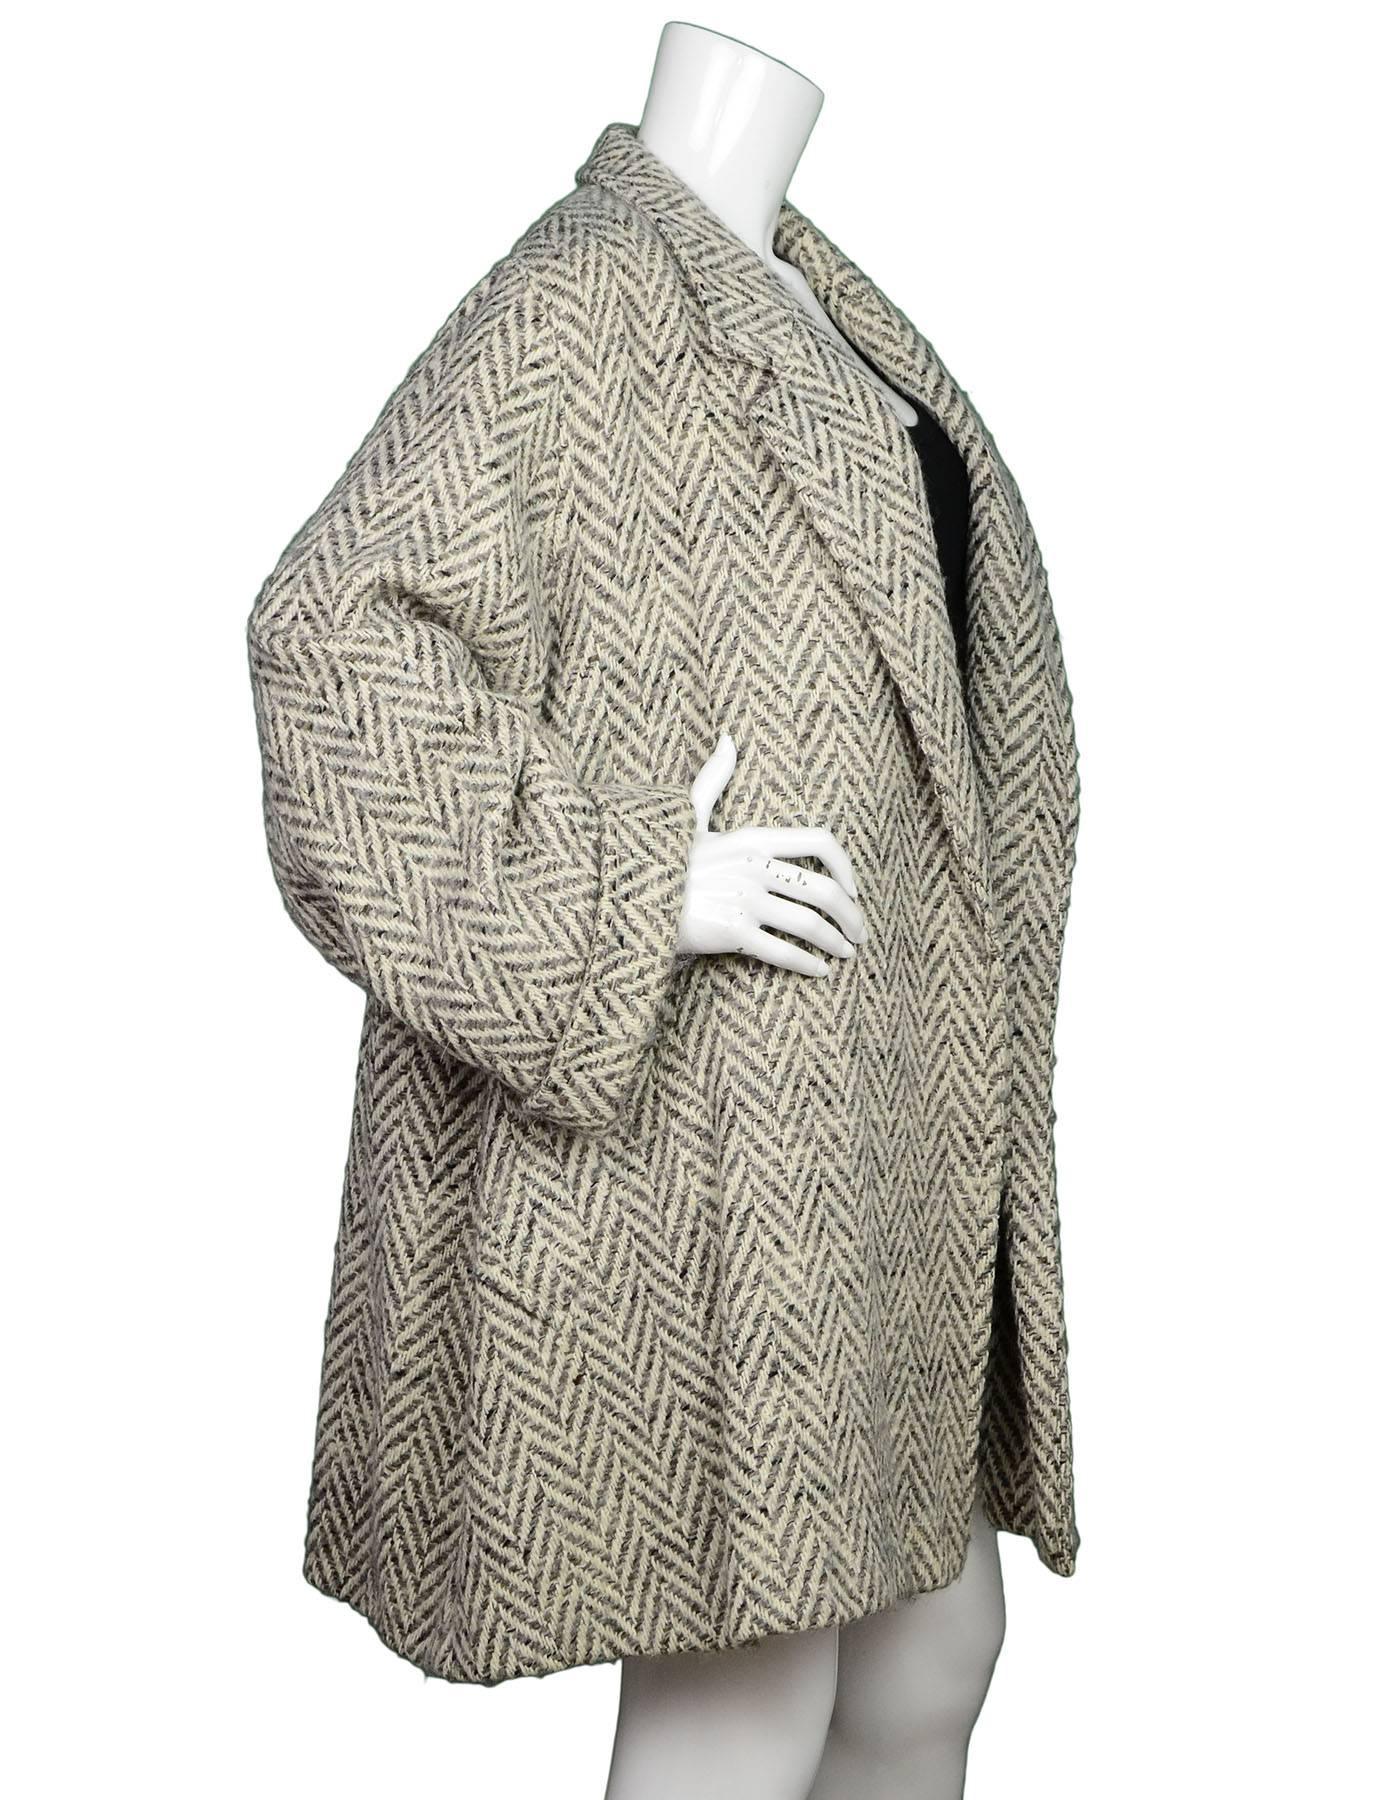 Max Mara Beige Herringbone/Tweed Open Swing Coat 
Features cuffed sleeves

Made In: Italy
Color: Beige, neutrals
Composition: 100% wool
Lining: Beige, 70% acetate, 30% Cupro
Closure/Opening: Open front
Exterior Pockets: Two hip pockets
Interior